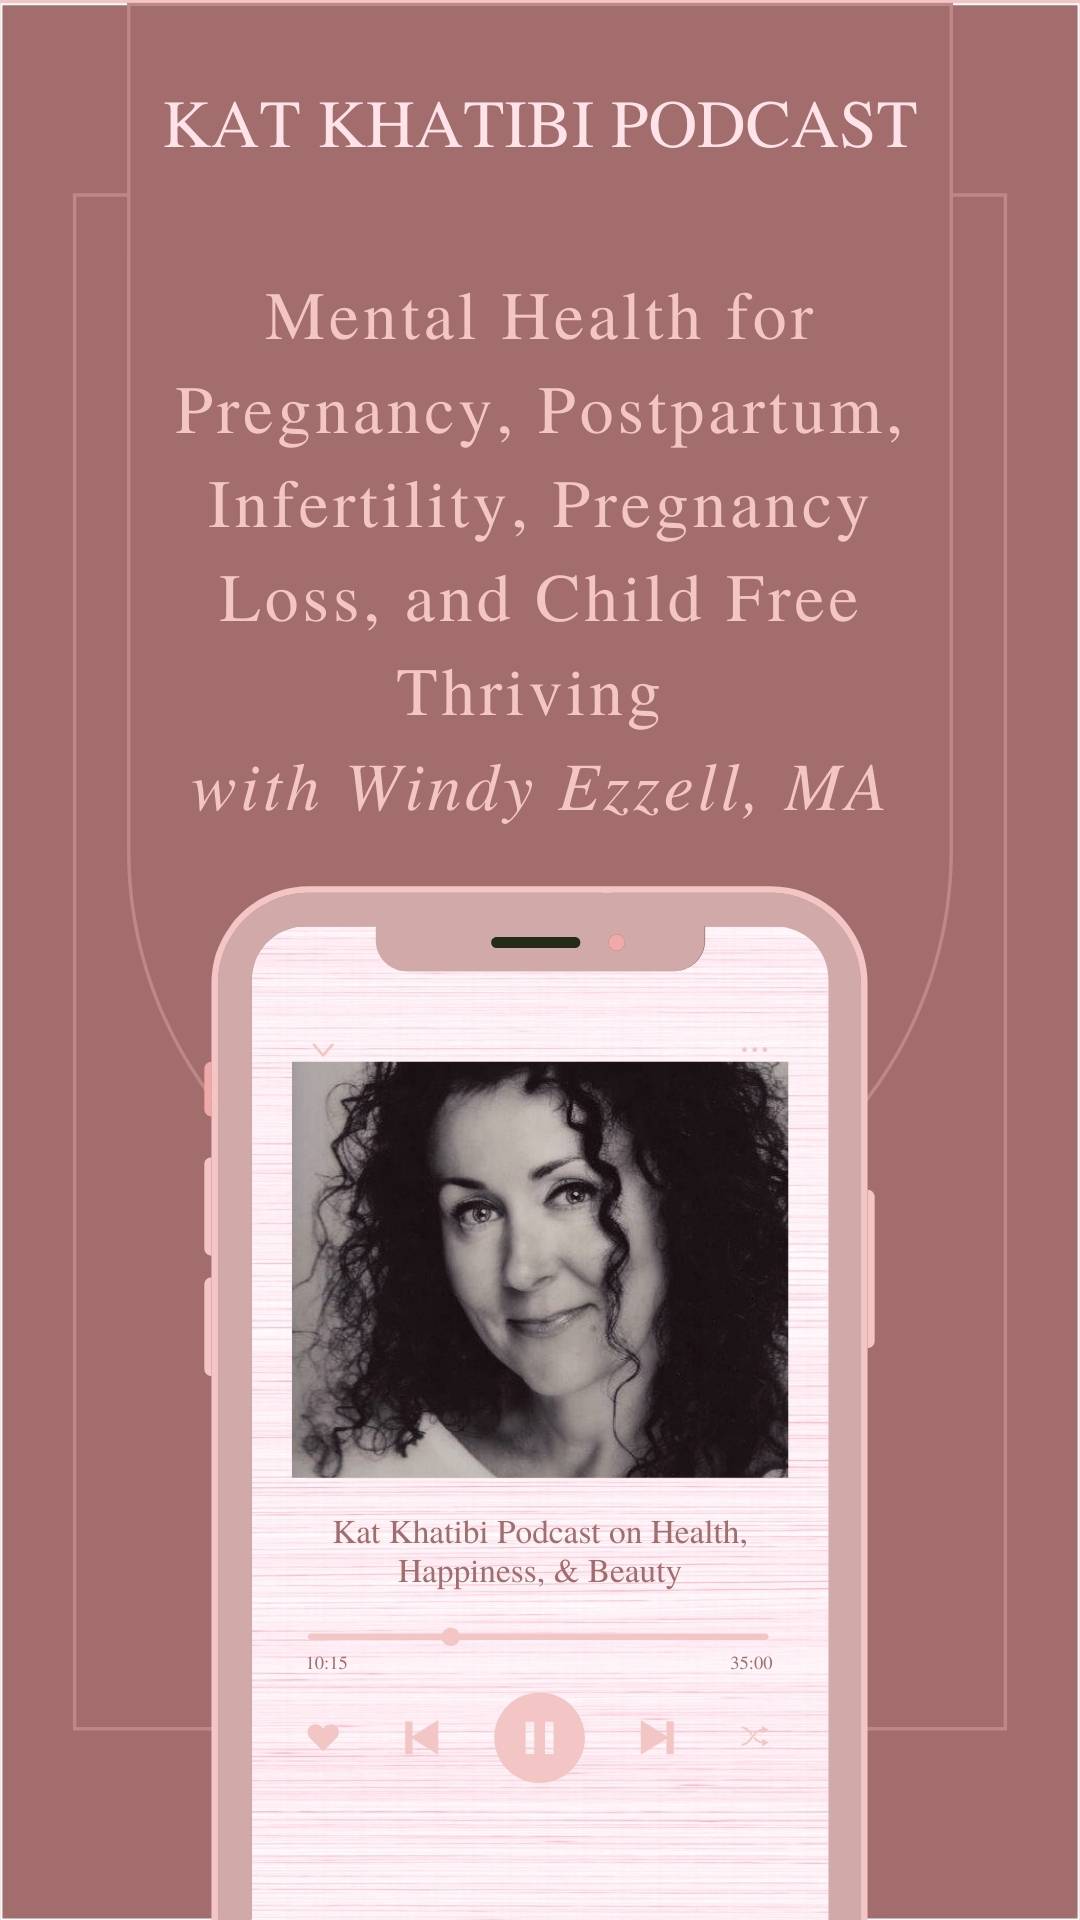 Mental Health for Pregnancy, Postpartum, Infertility, Pregnancy Loss, and Child Free Thriving with Windy Ezzell, MA